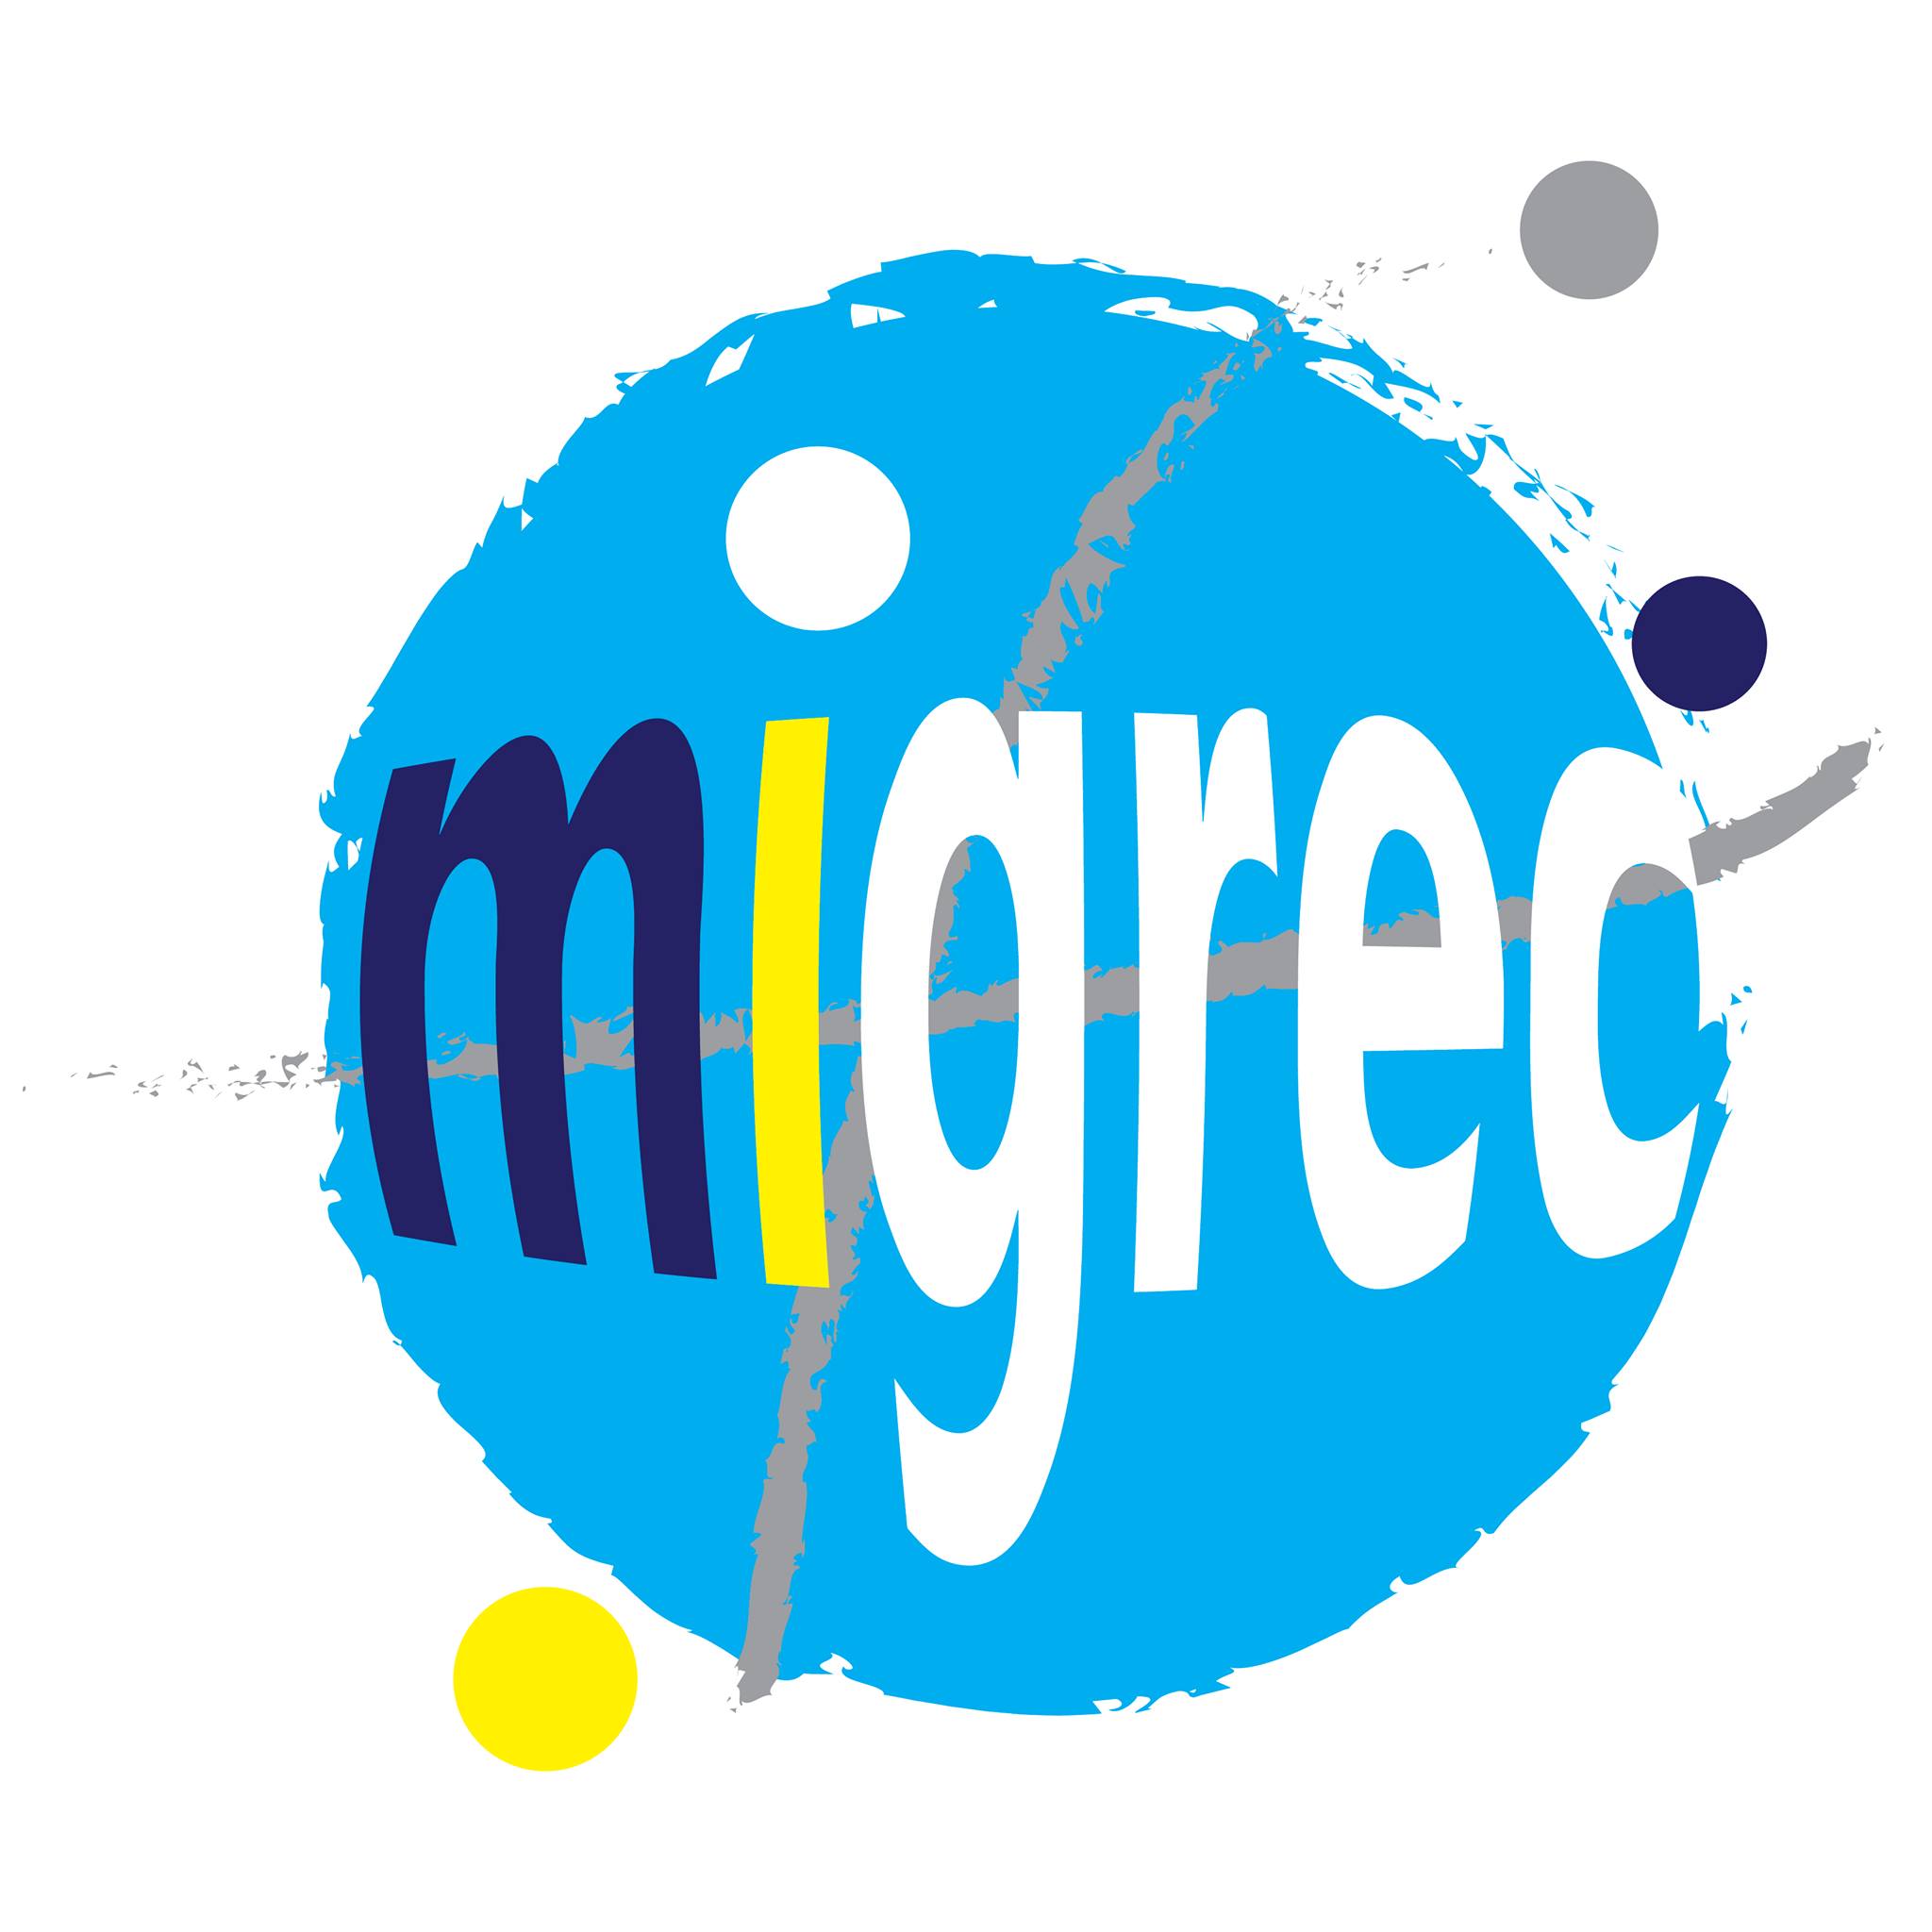 MIGREC project – Newsletter #3